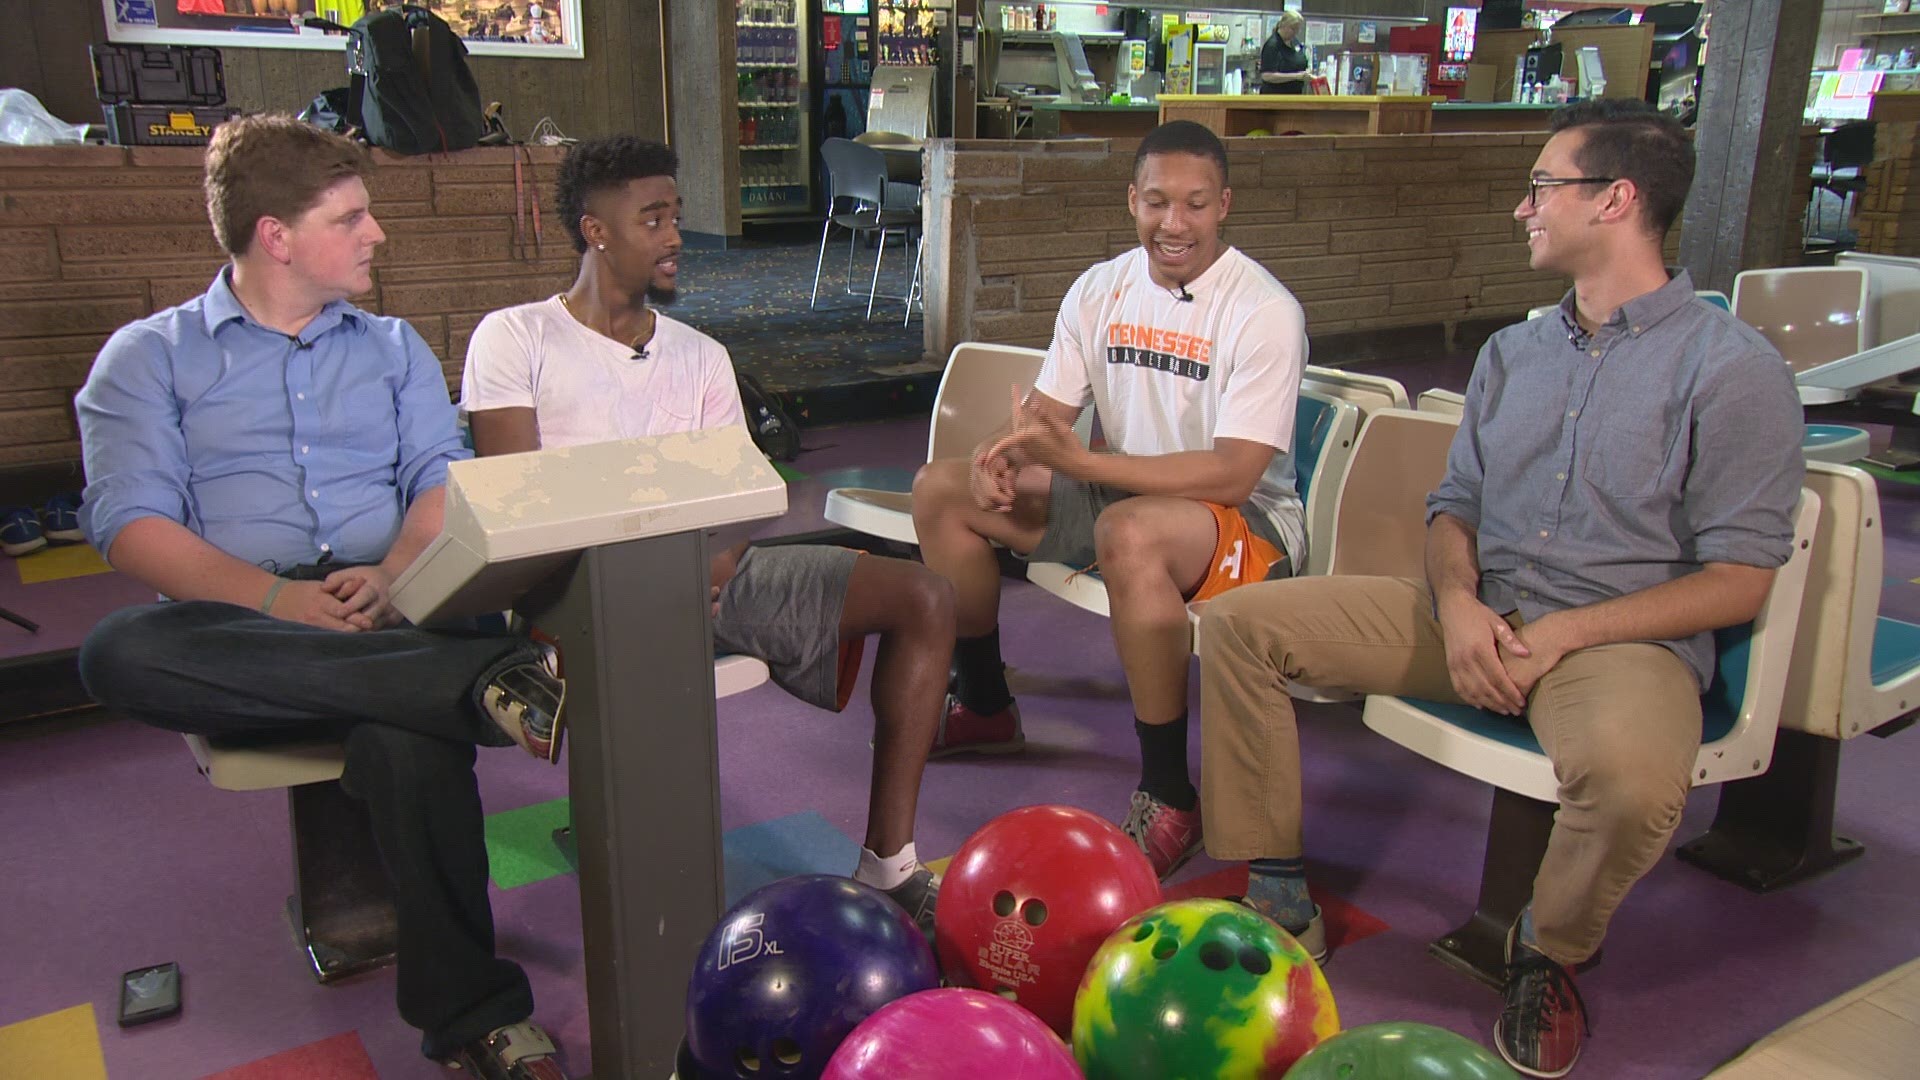 After bowling, Tennessee basketball players Jordan Bone and Grant Williams sit down with the sports team to talk about next season.